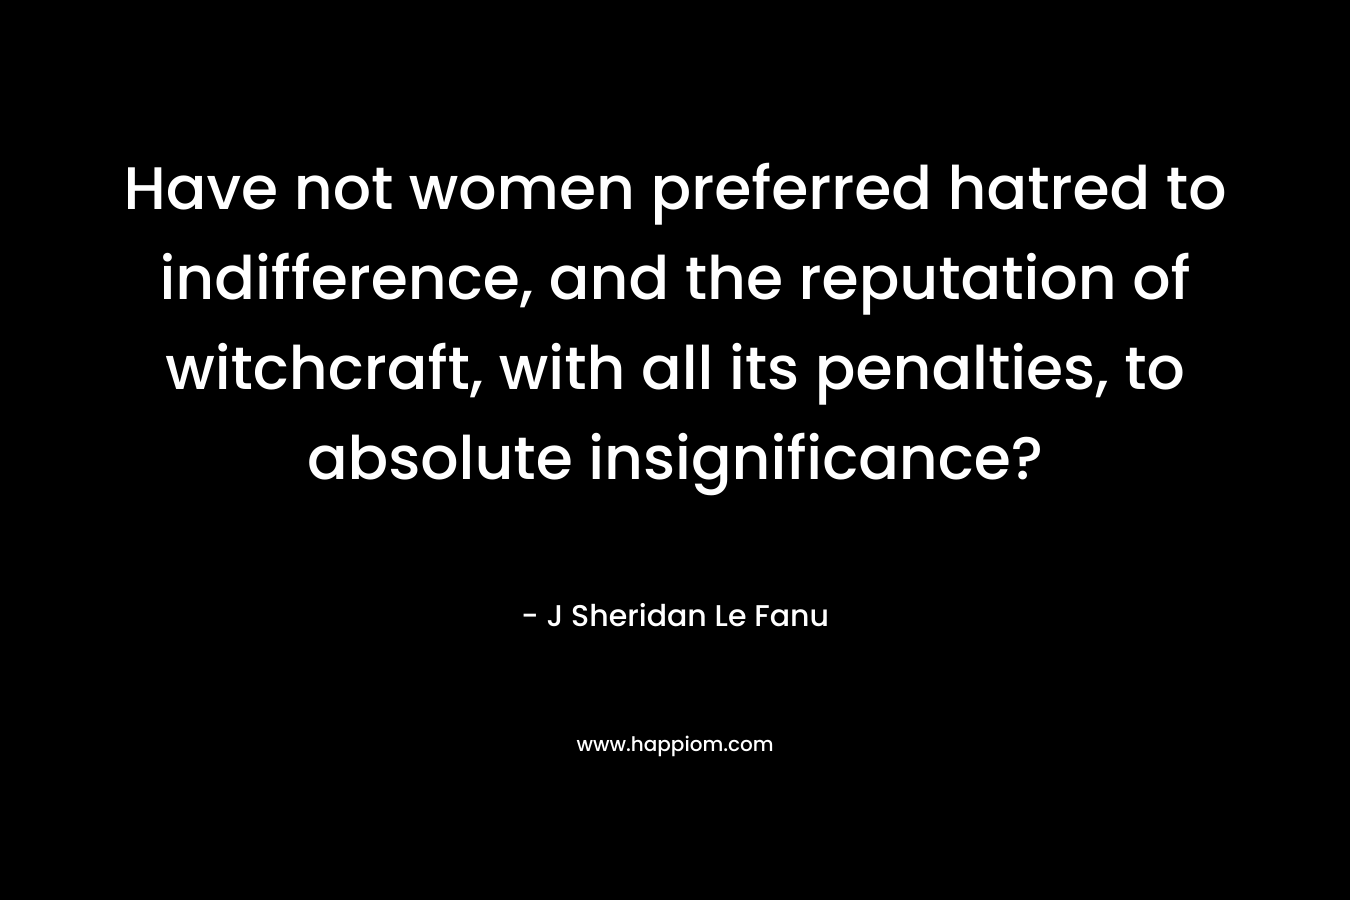 Have not women preferred hatred to indifference, and the reputation of witchcraft, with all its penalties, to absolute insignificance?